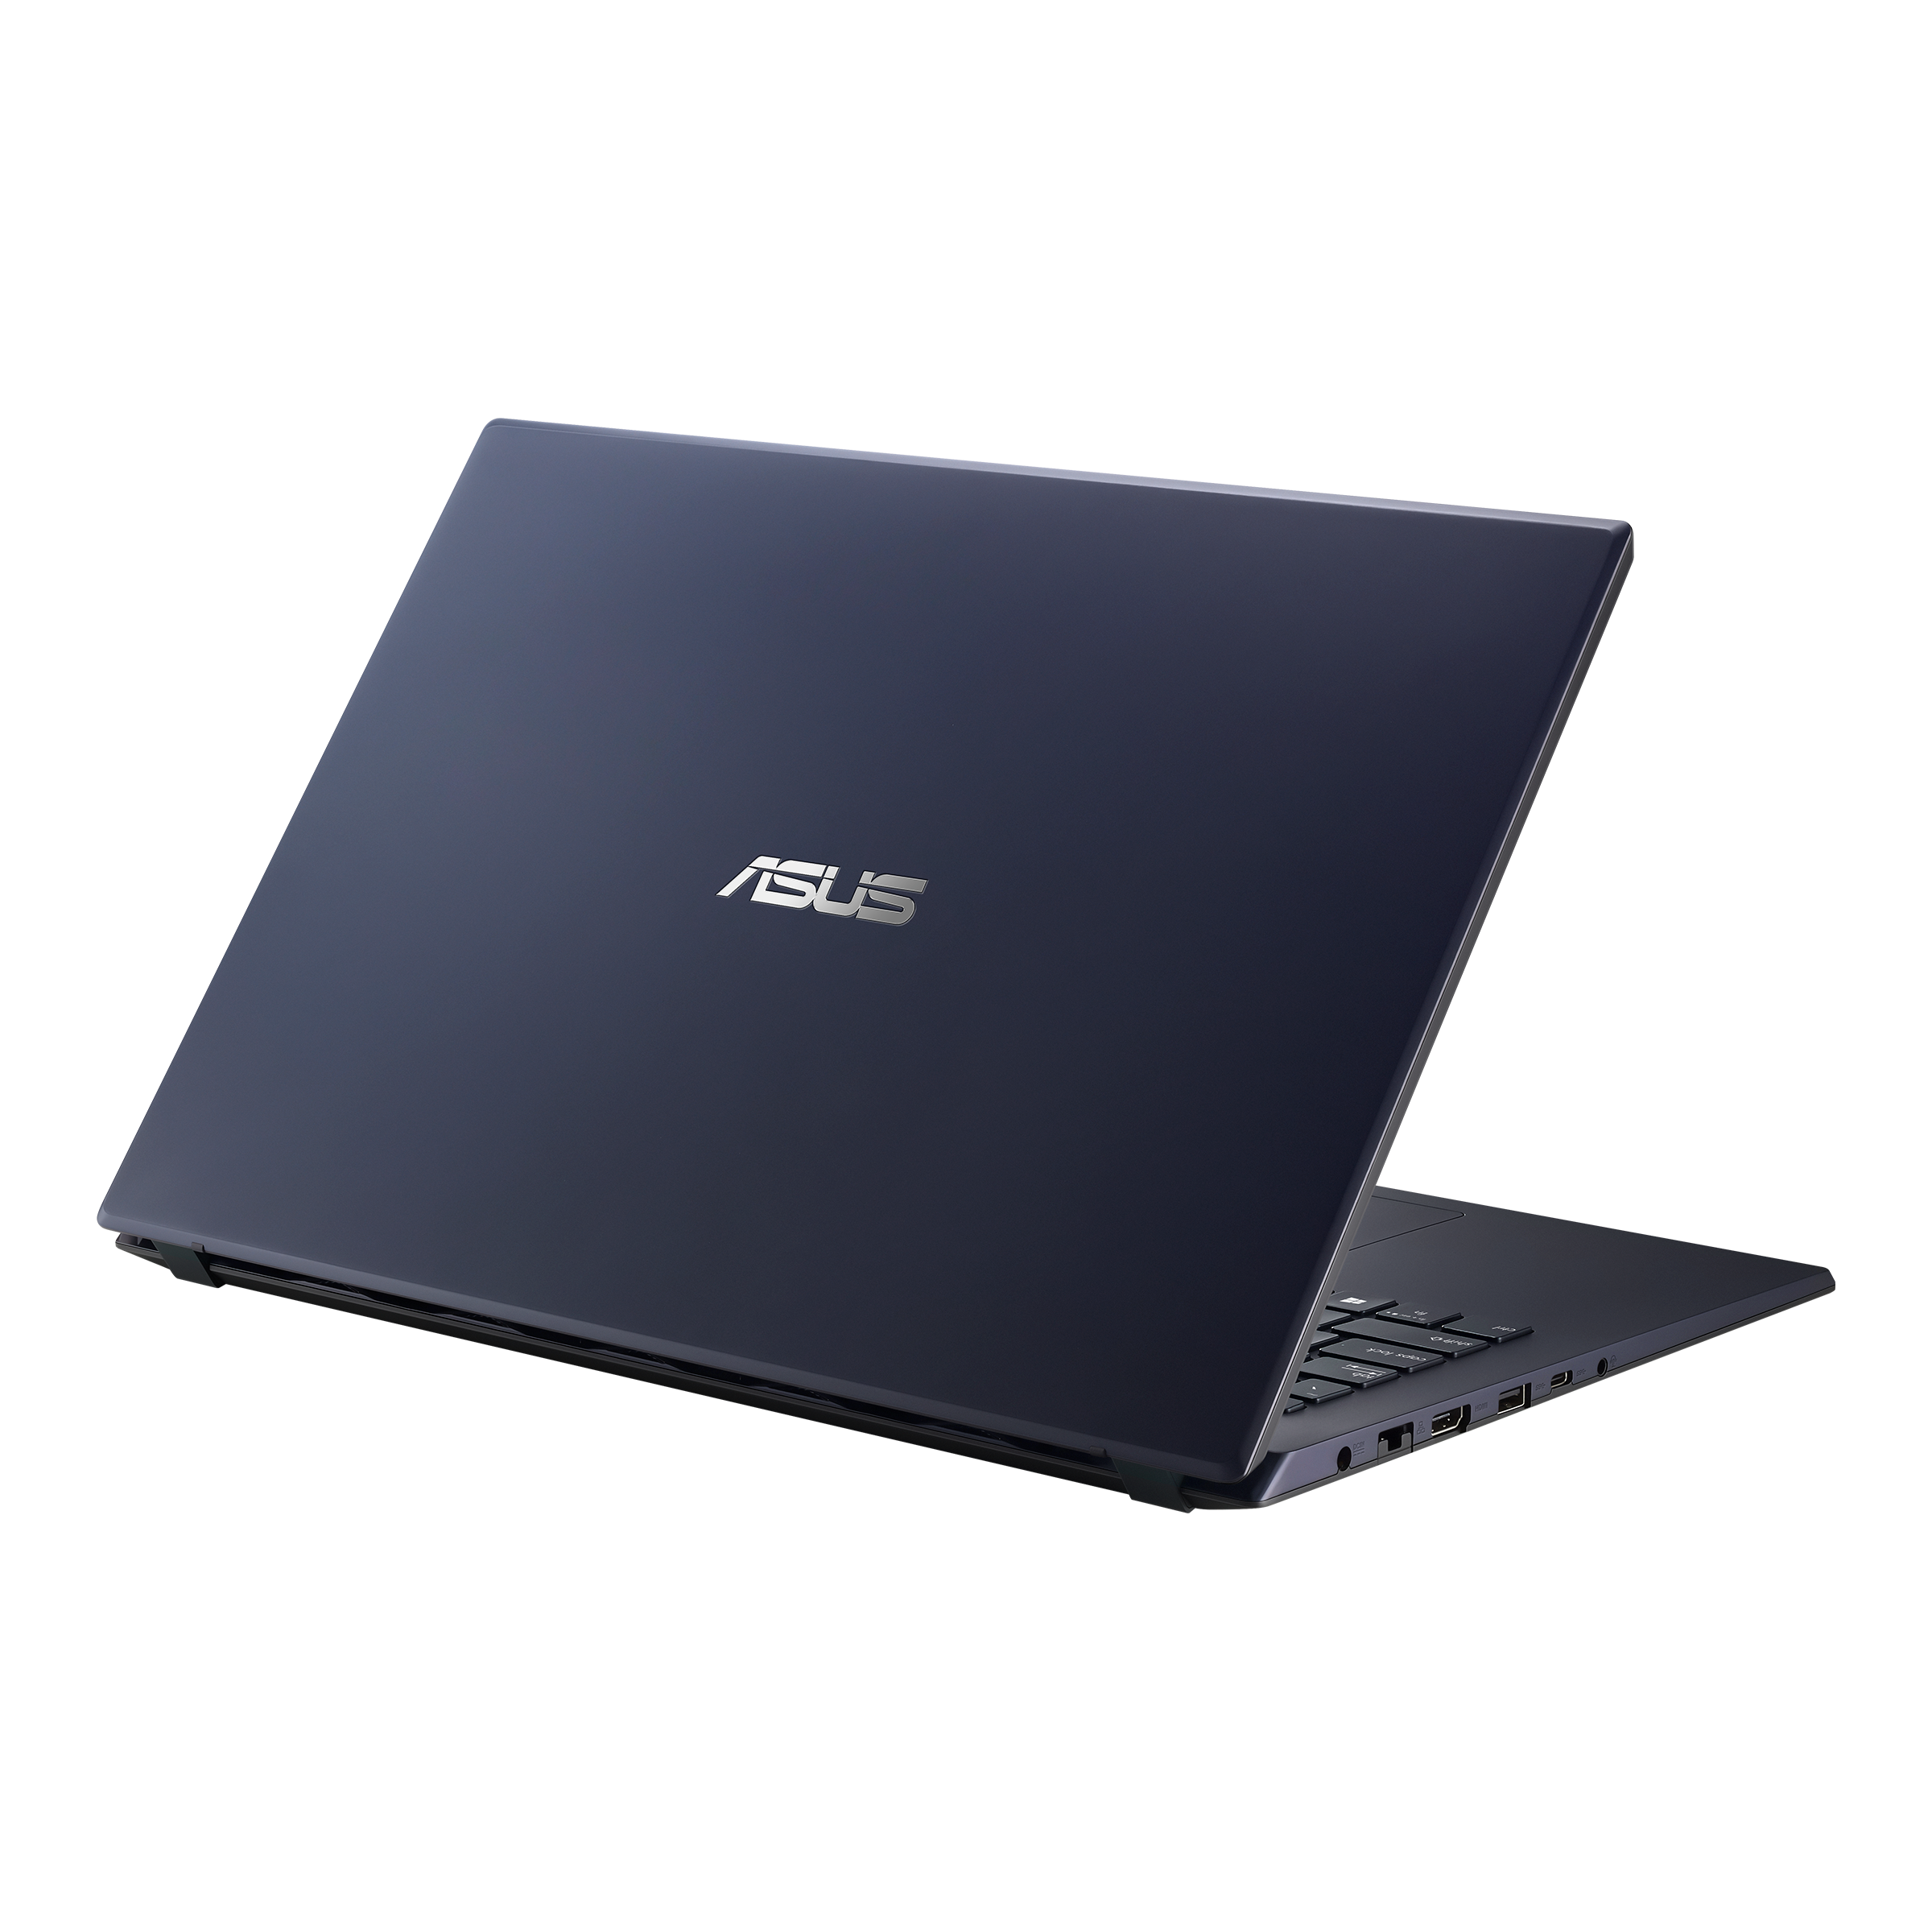 ASUS X543｜Laptops For Home｜ASUS Global